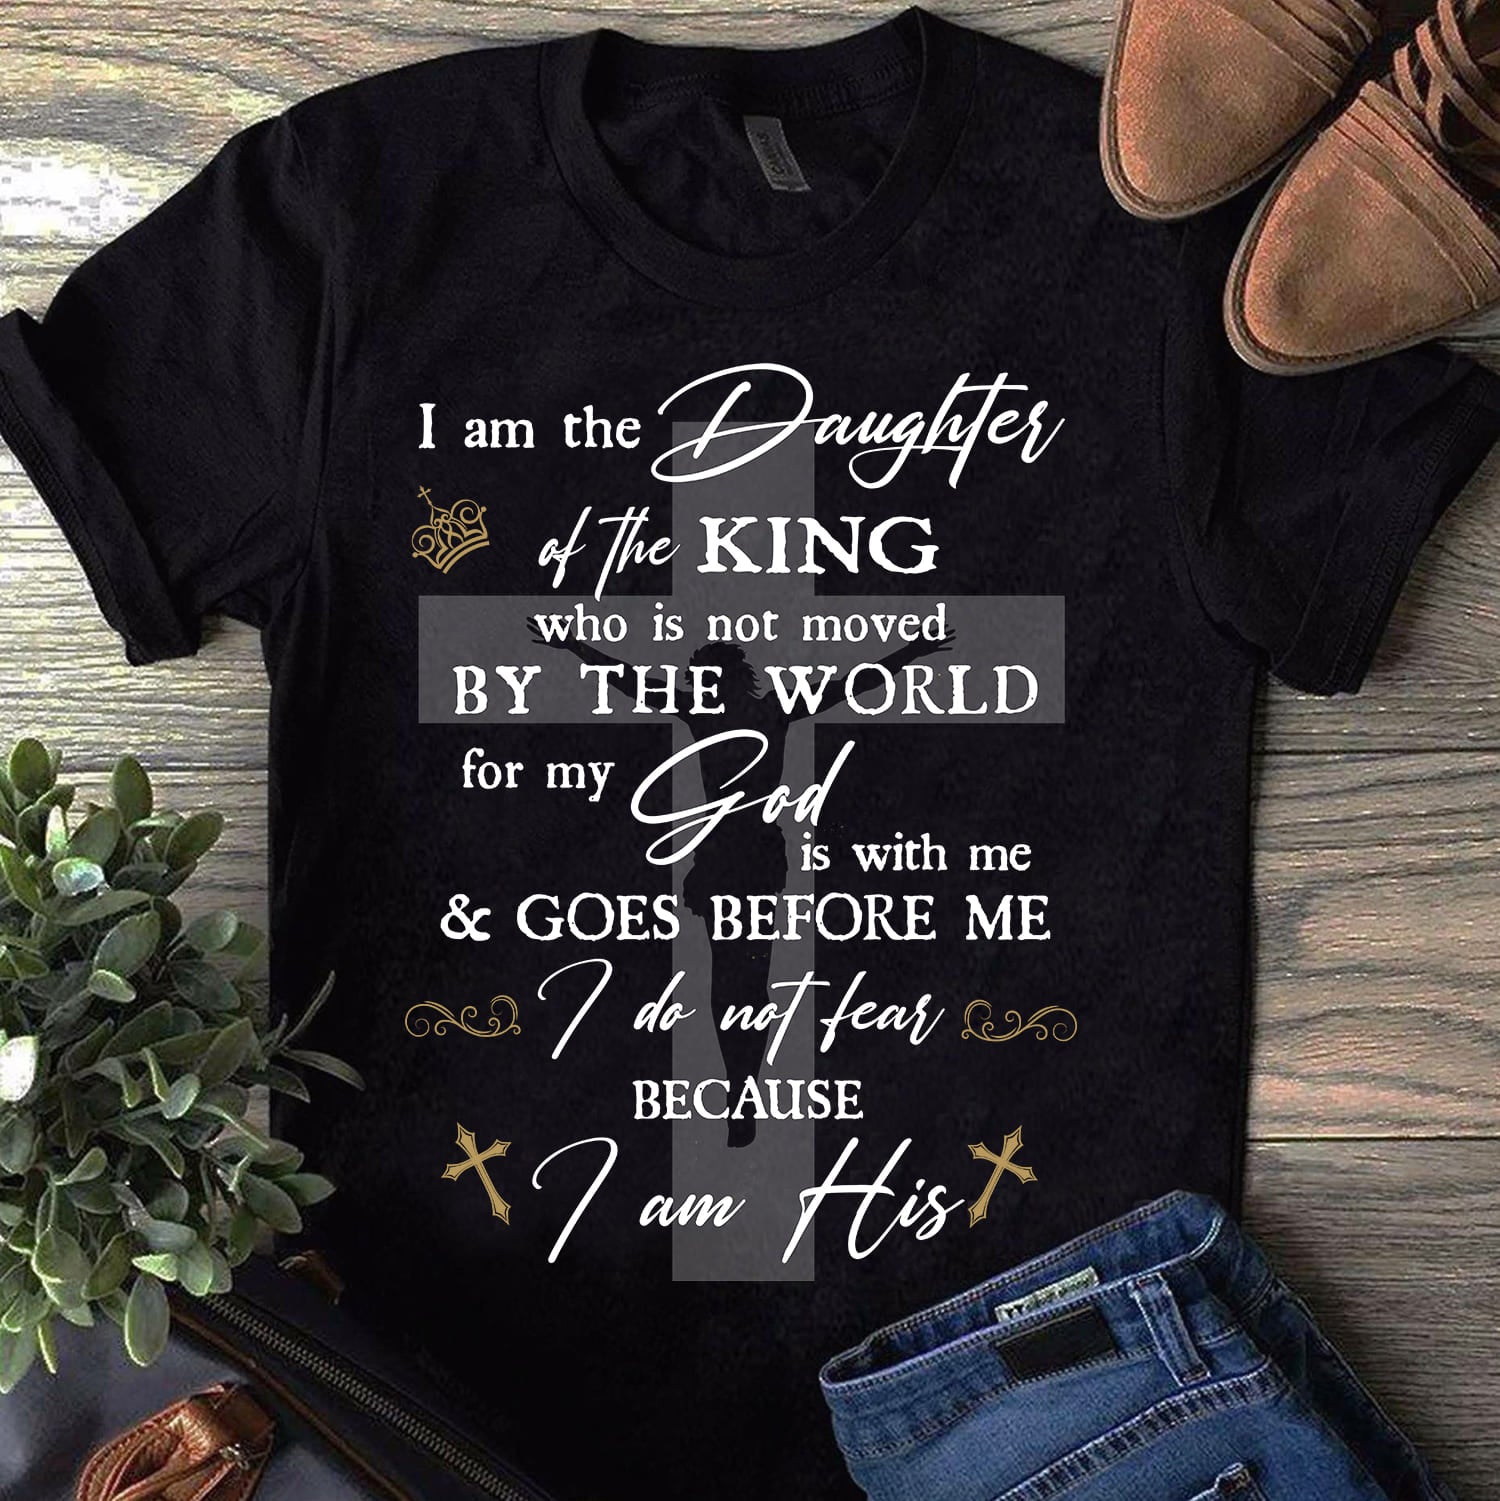 Jesus - Cross - I am the daughter of King - Apparel